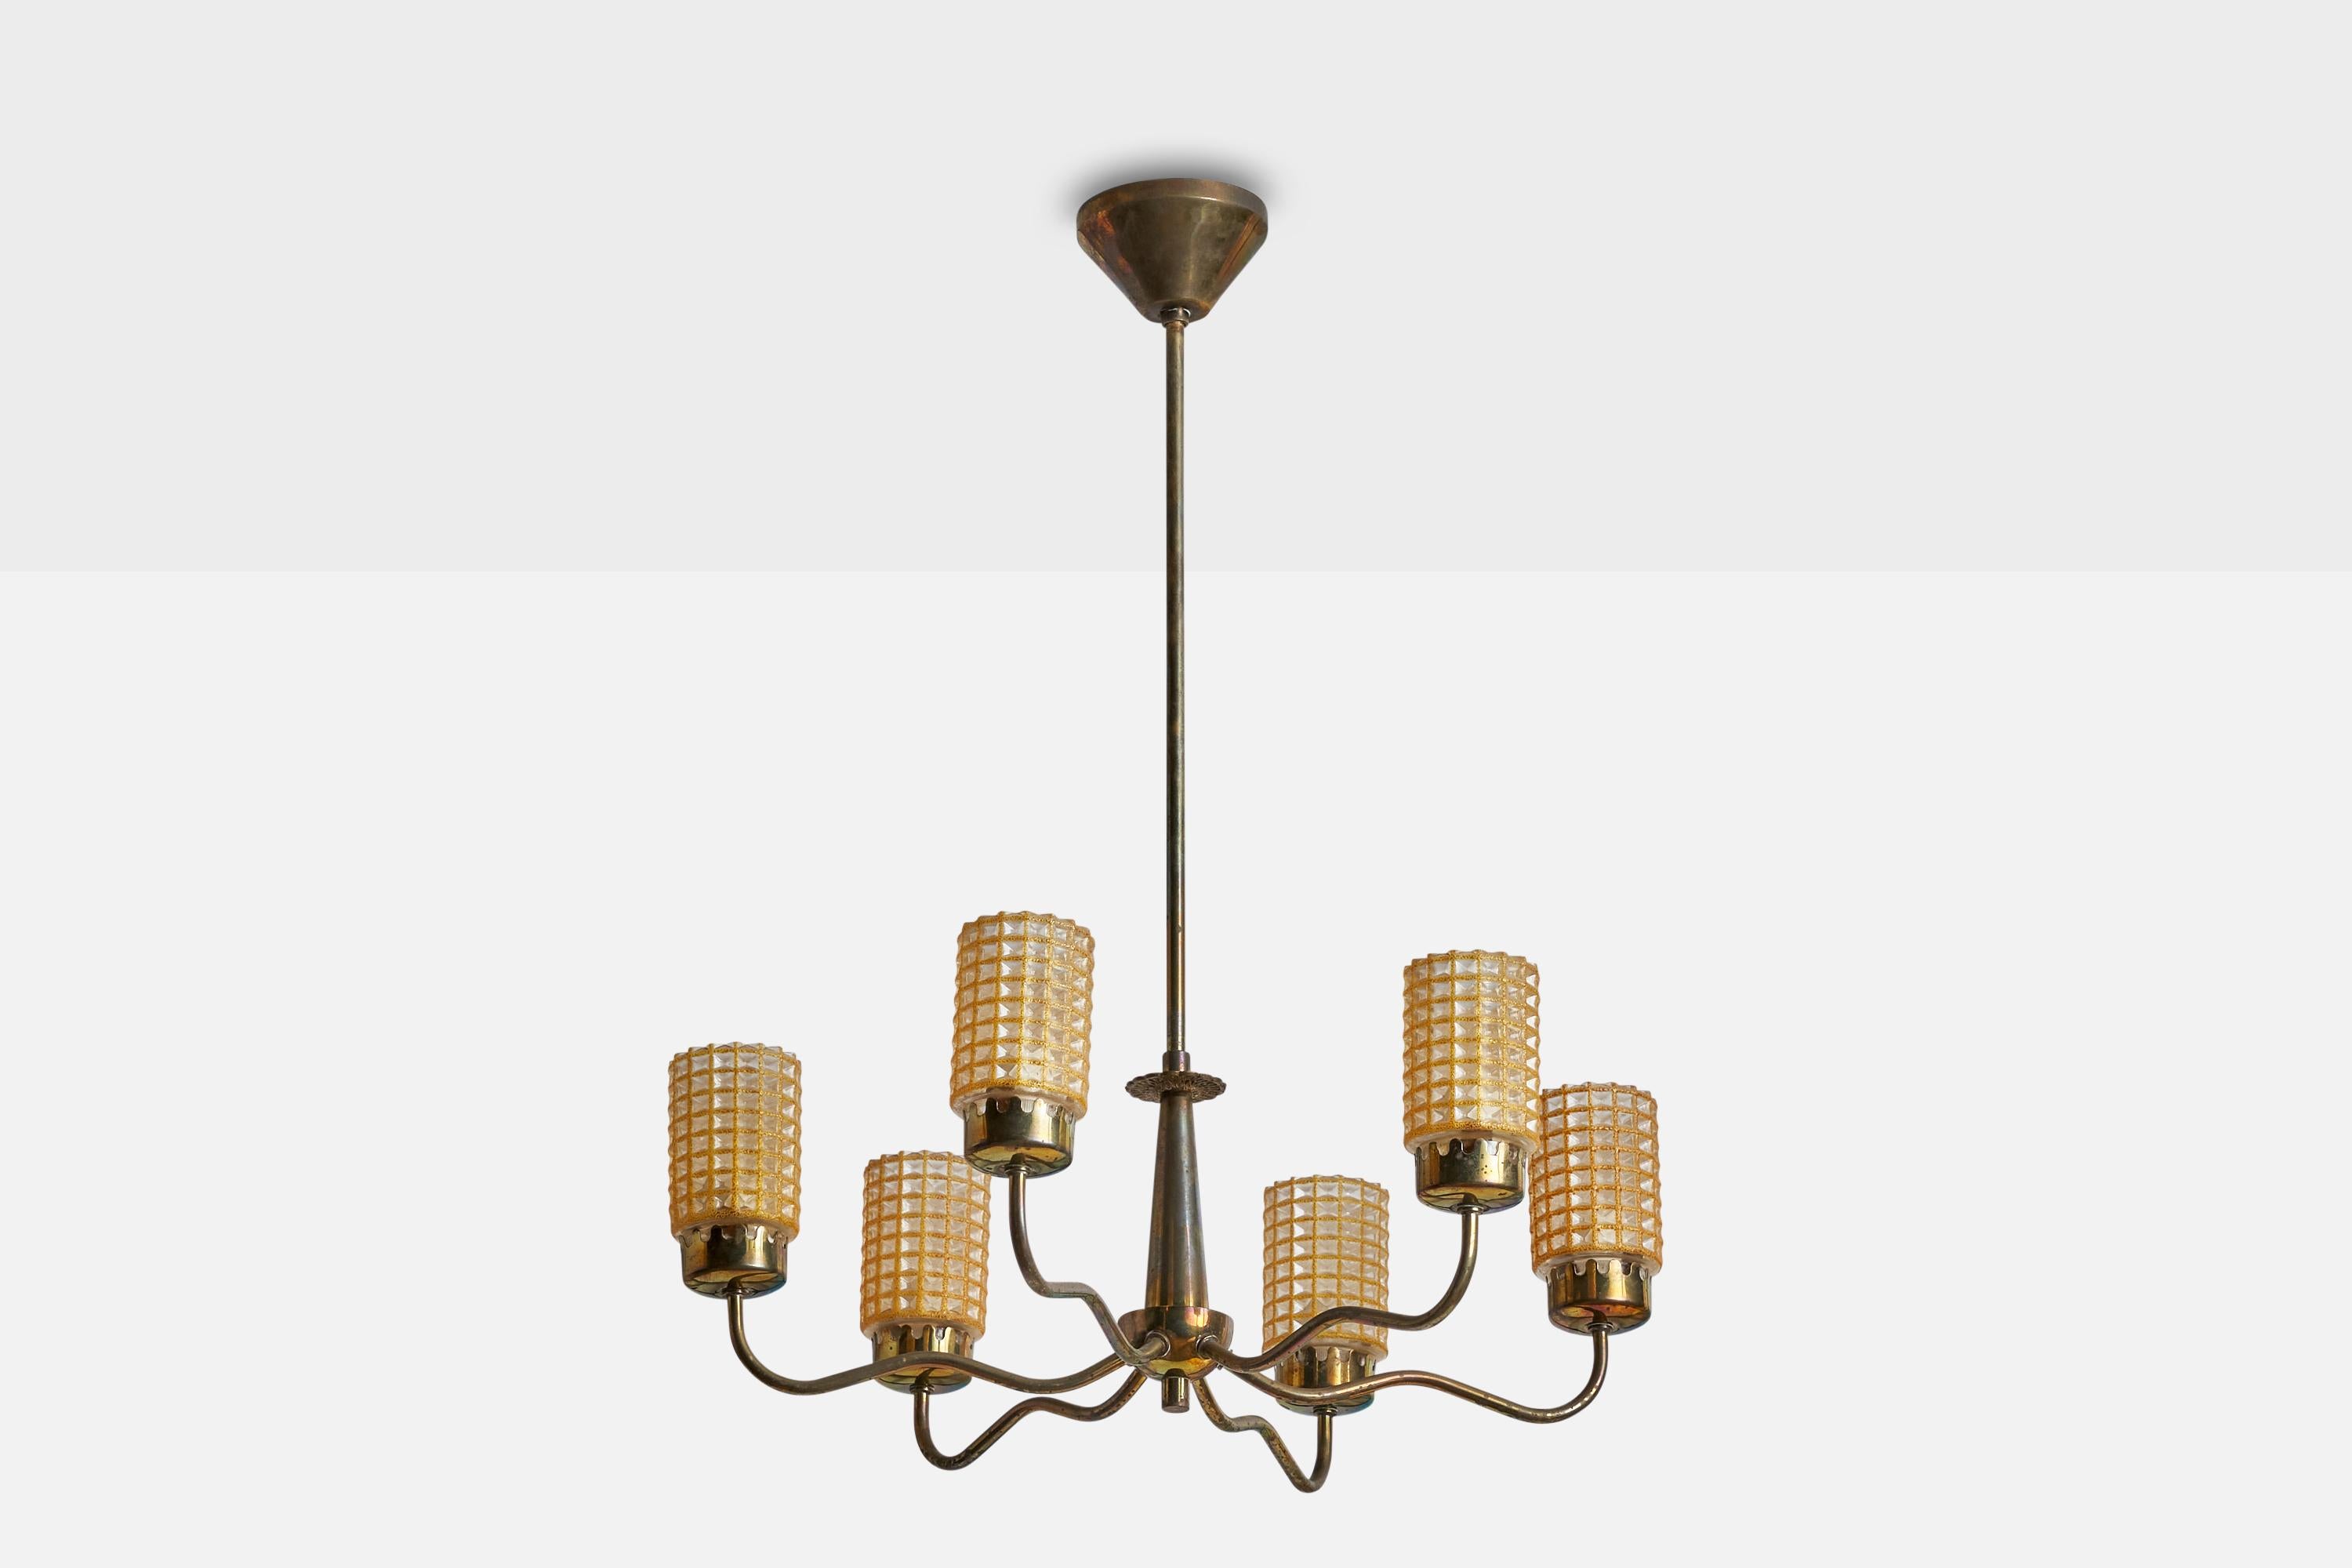 A brass and beige yellow glass chandelier designed and produced in Sweden, 1930s.

Dimensions of canopy (inches): 2” H x 3.75” Diameter
Socket takes standard E-14 bulbs. 5 sockets.There is no maximum wattage stated on the fixture. All lighting will